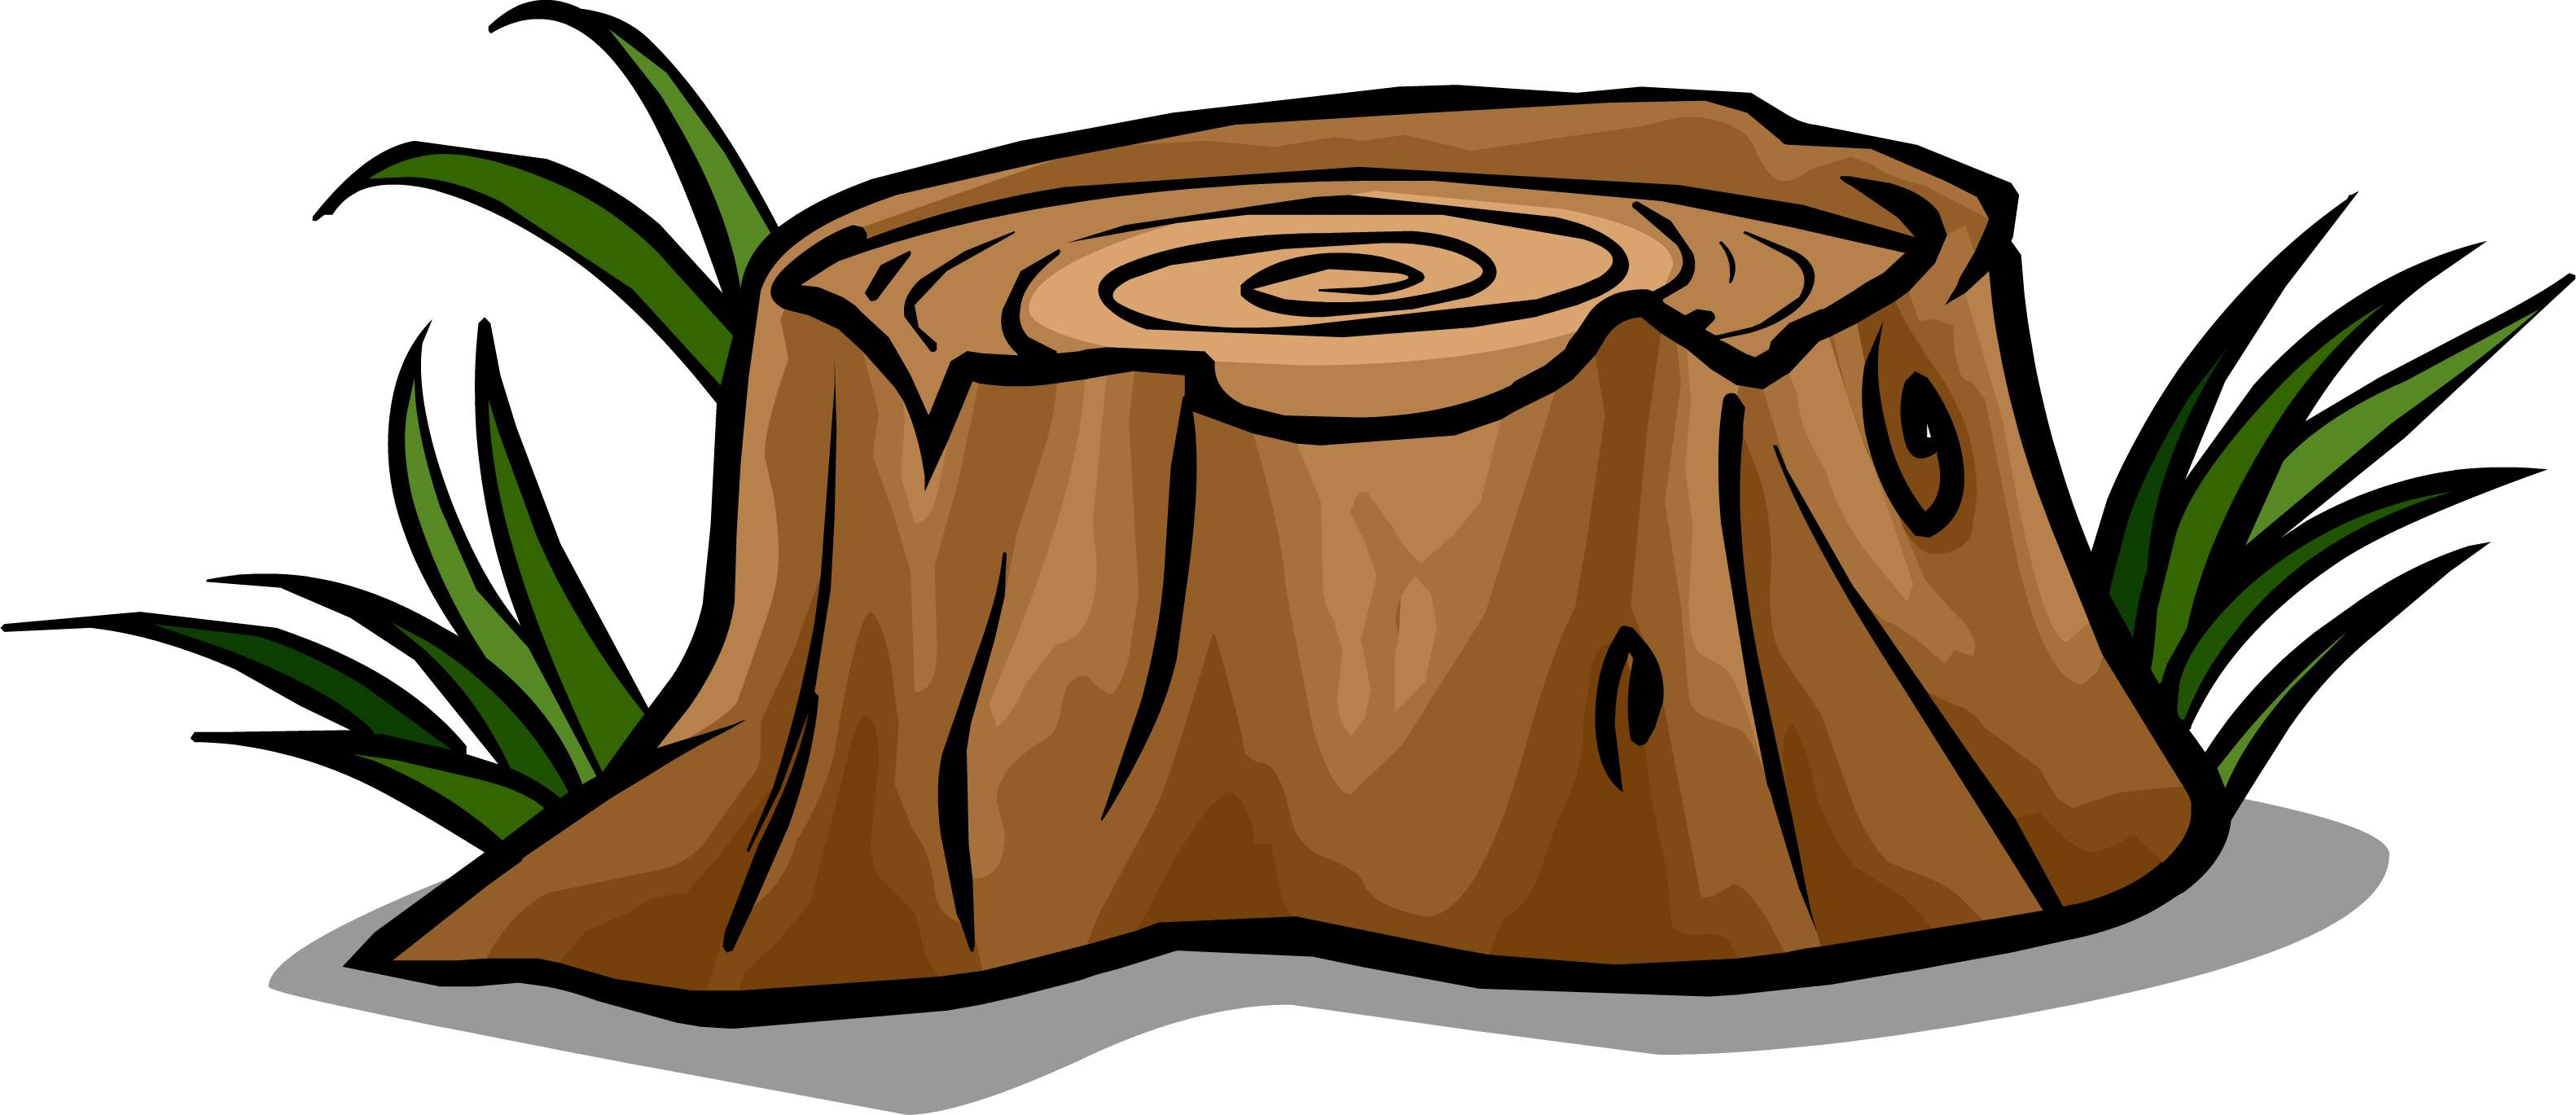 Free Tree Stump Cliparts, Download Free Tree Stump Cliparts png images